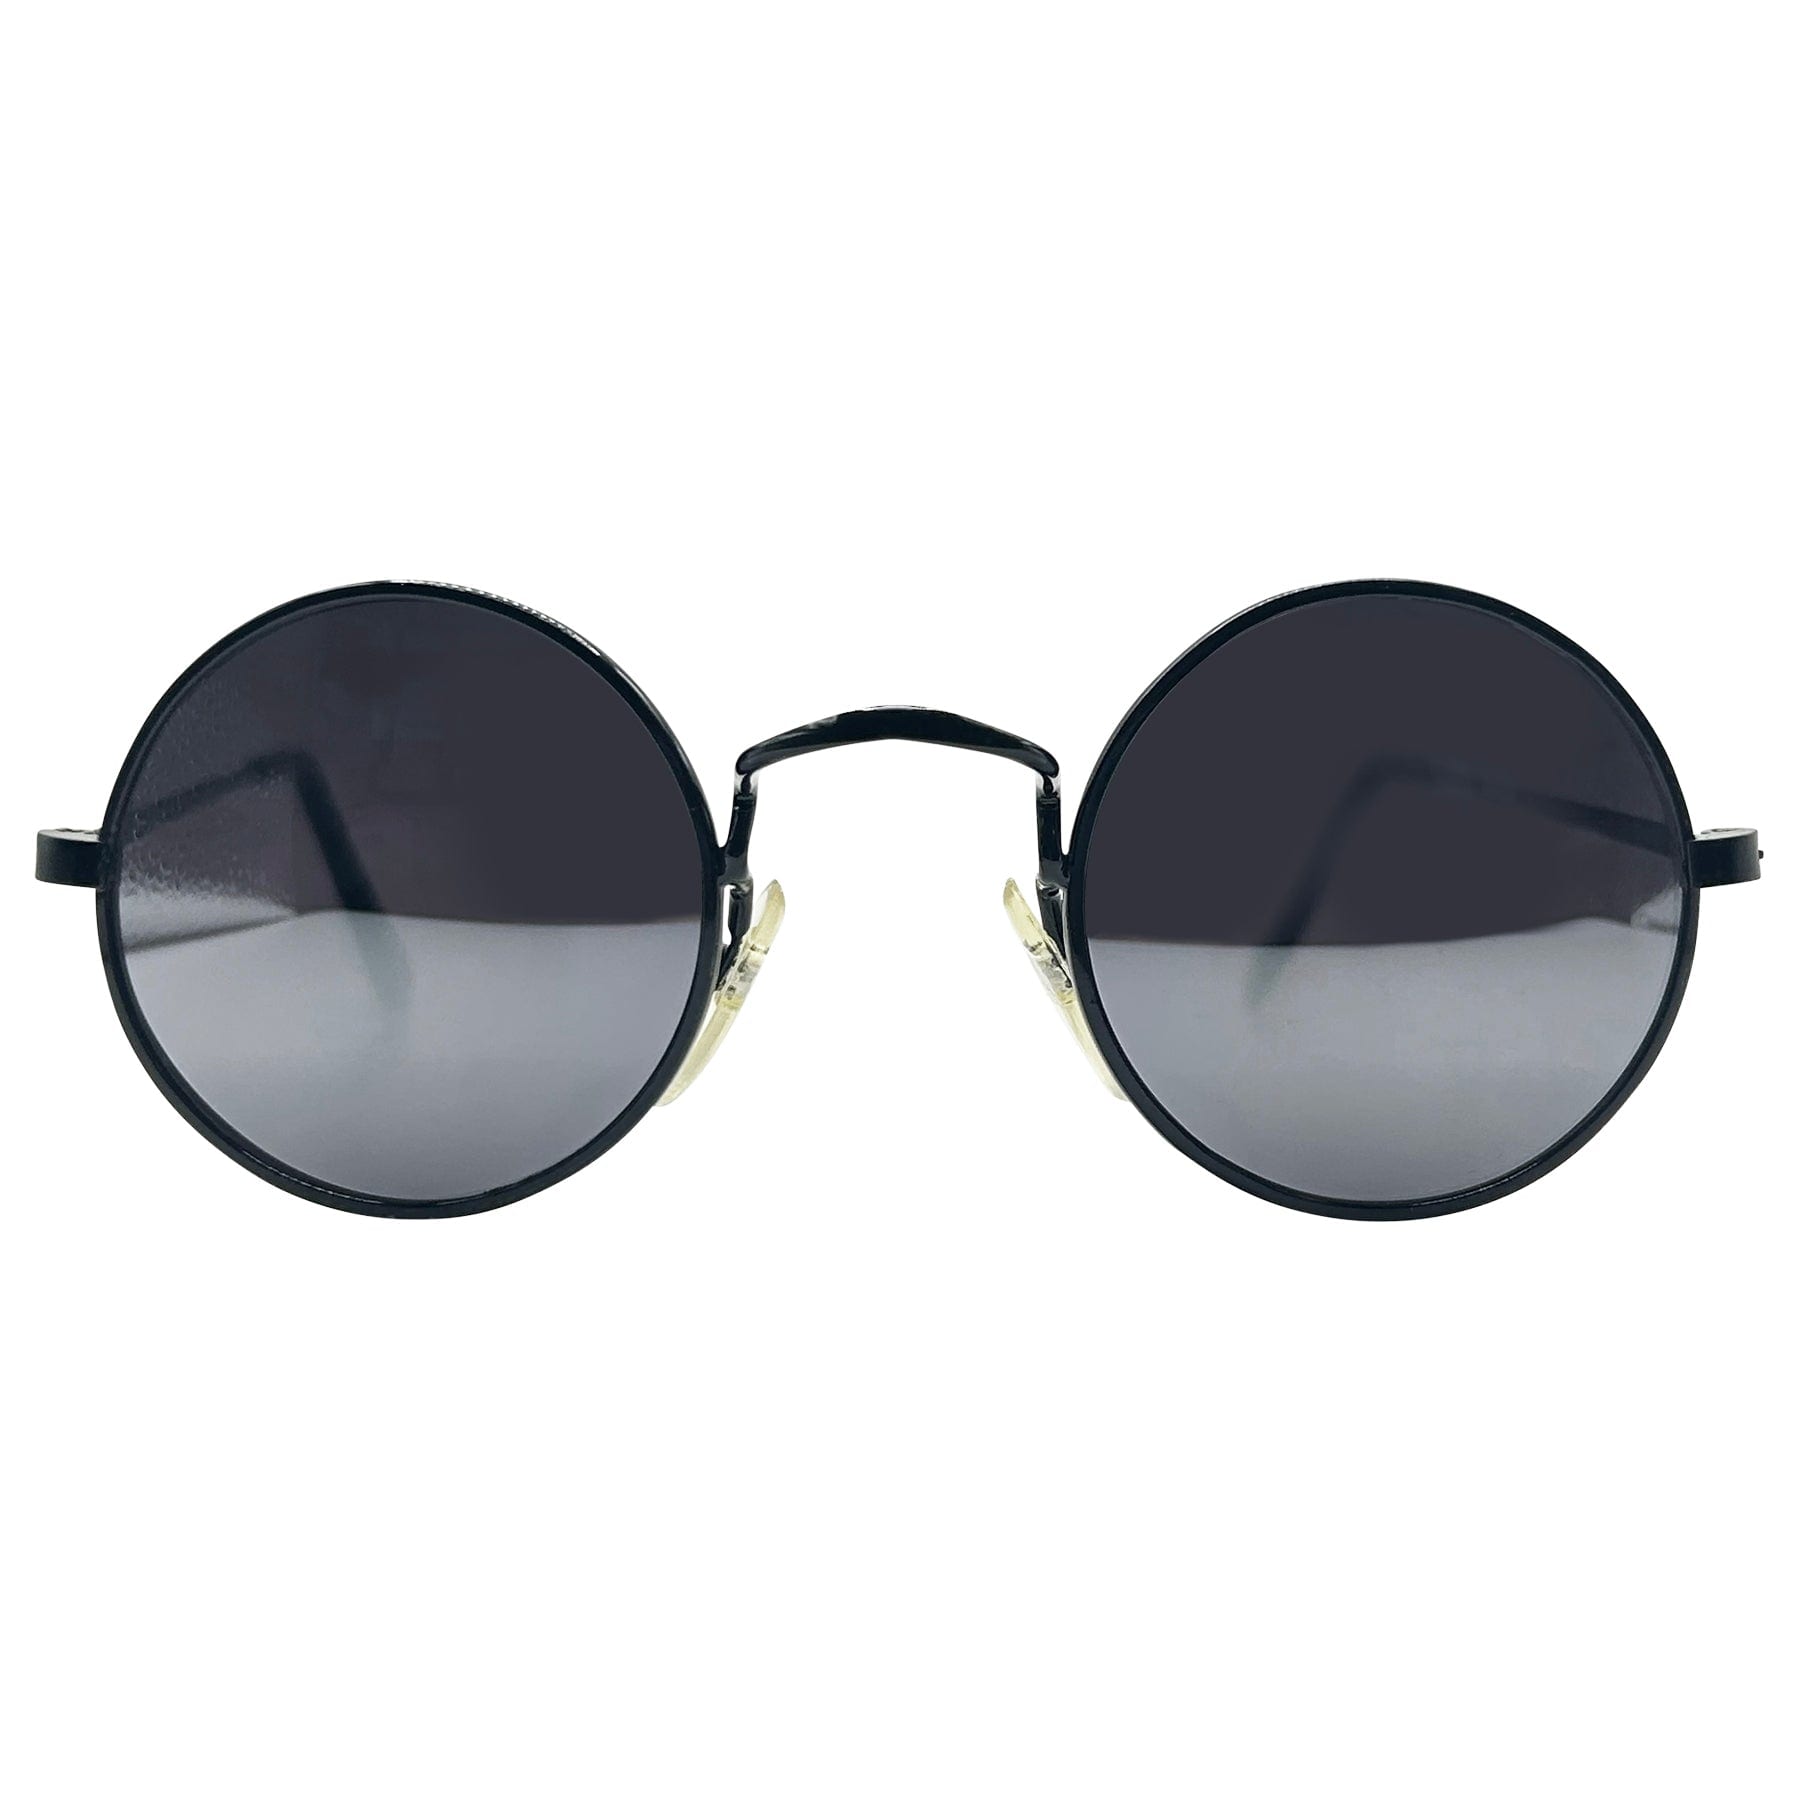 round 90s sunglasses with a black frame and super dark lens